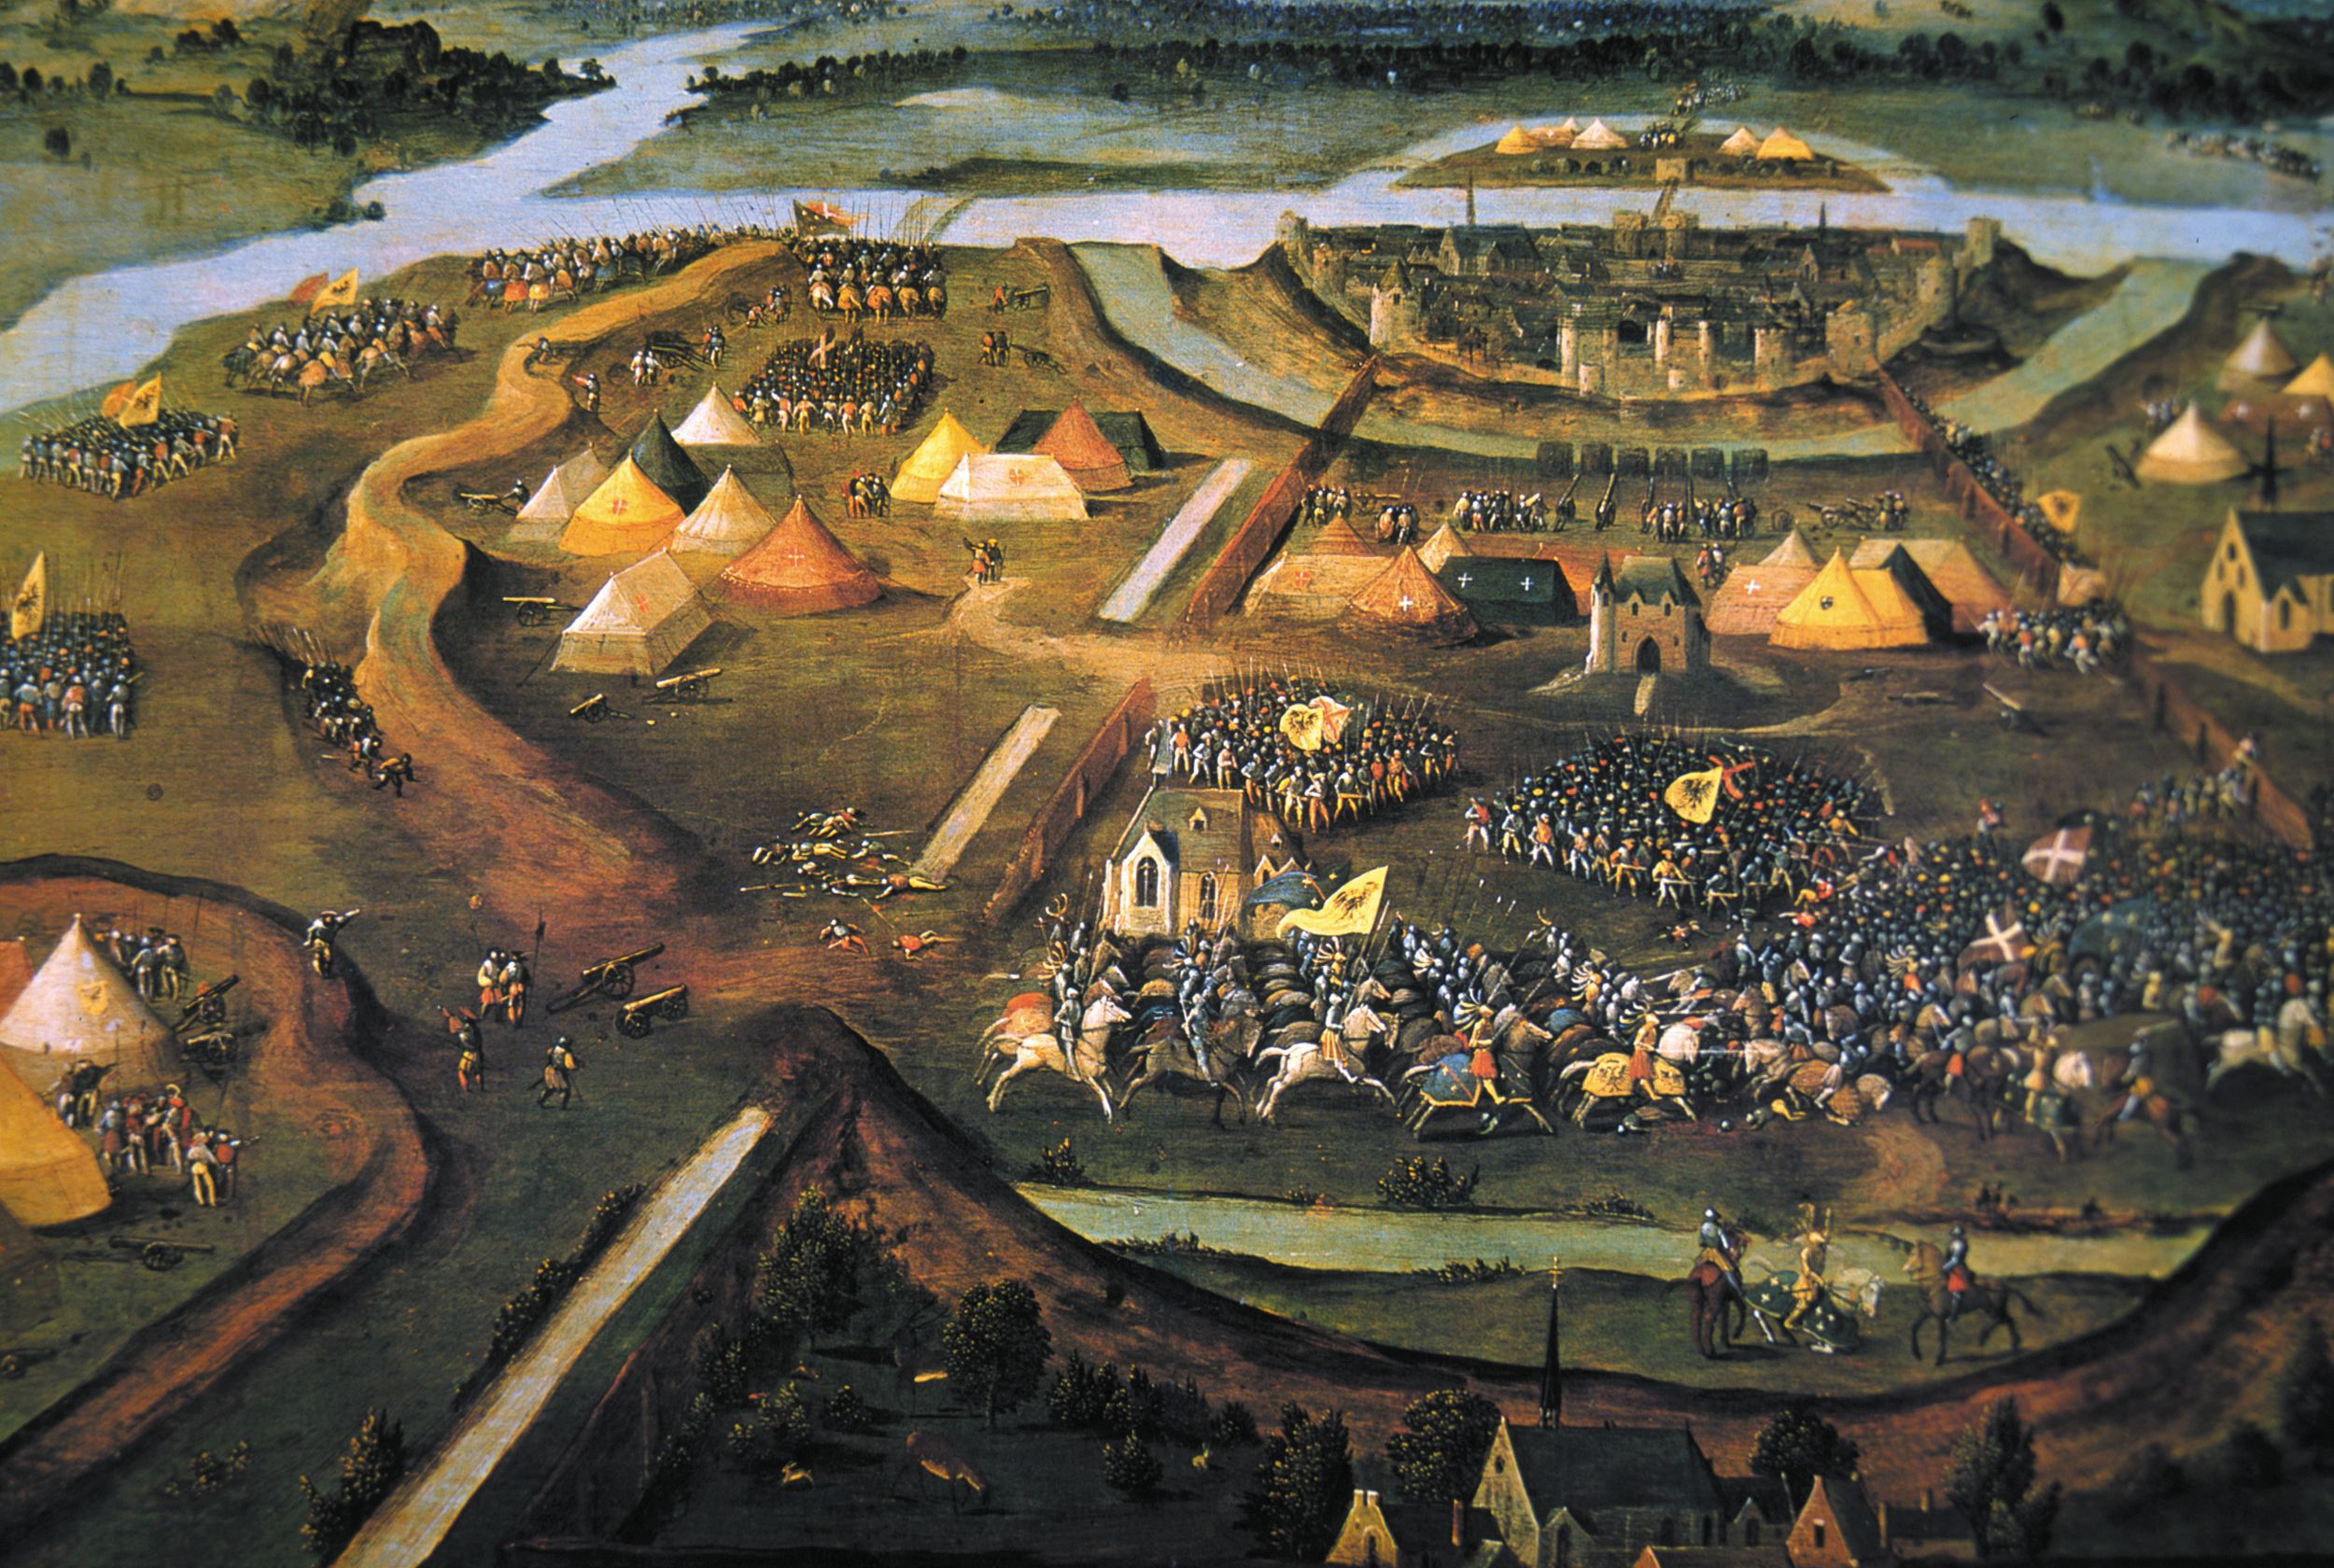 A contemporary painting credited to the school of Joachim Patinier depicts the climax of the fighting at Pavia. In the background is the Ticino River and Mirabello Castle. 